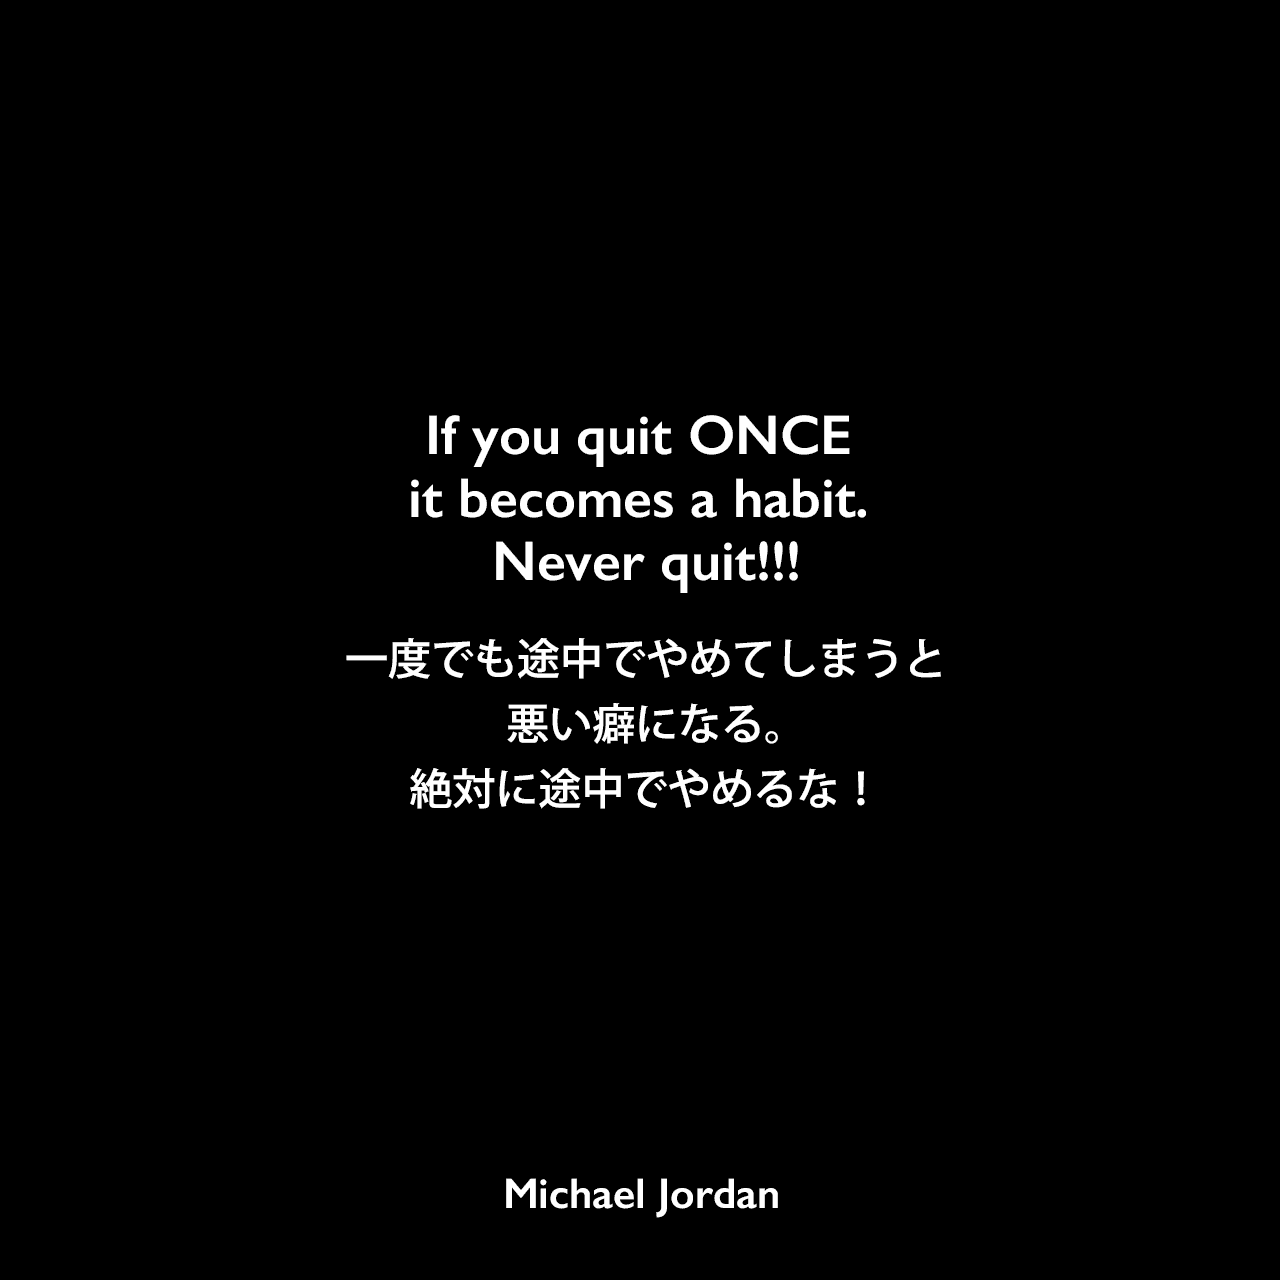 If you quit ONCE it becomes a habit. Never quit!!!一度でも途中でやめてしまうと、悪い癖になる。絶対に途中でやめるな！